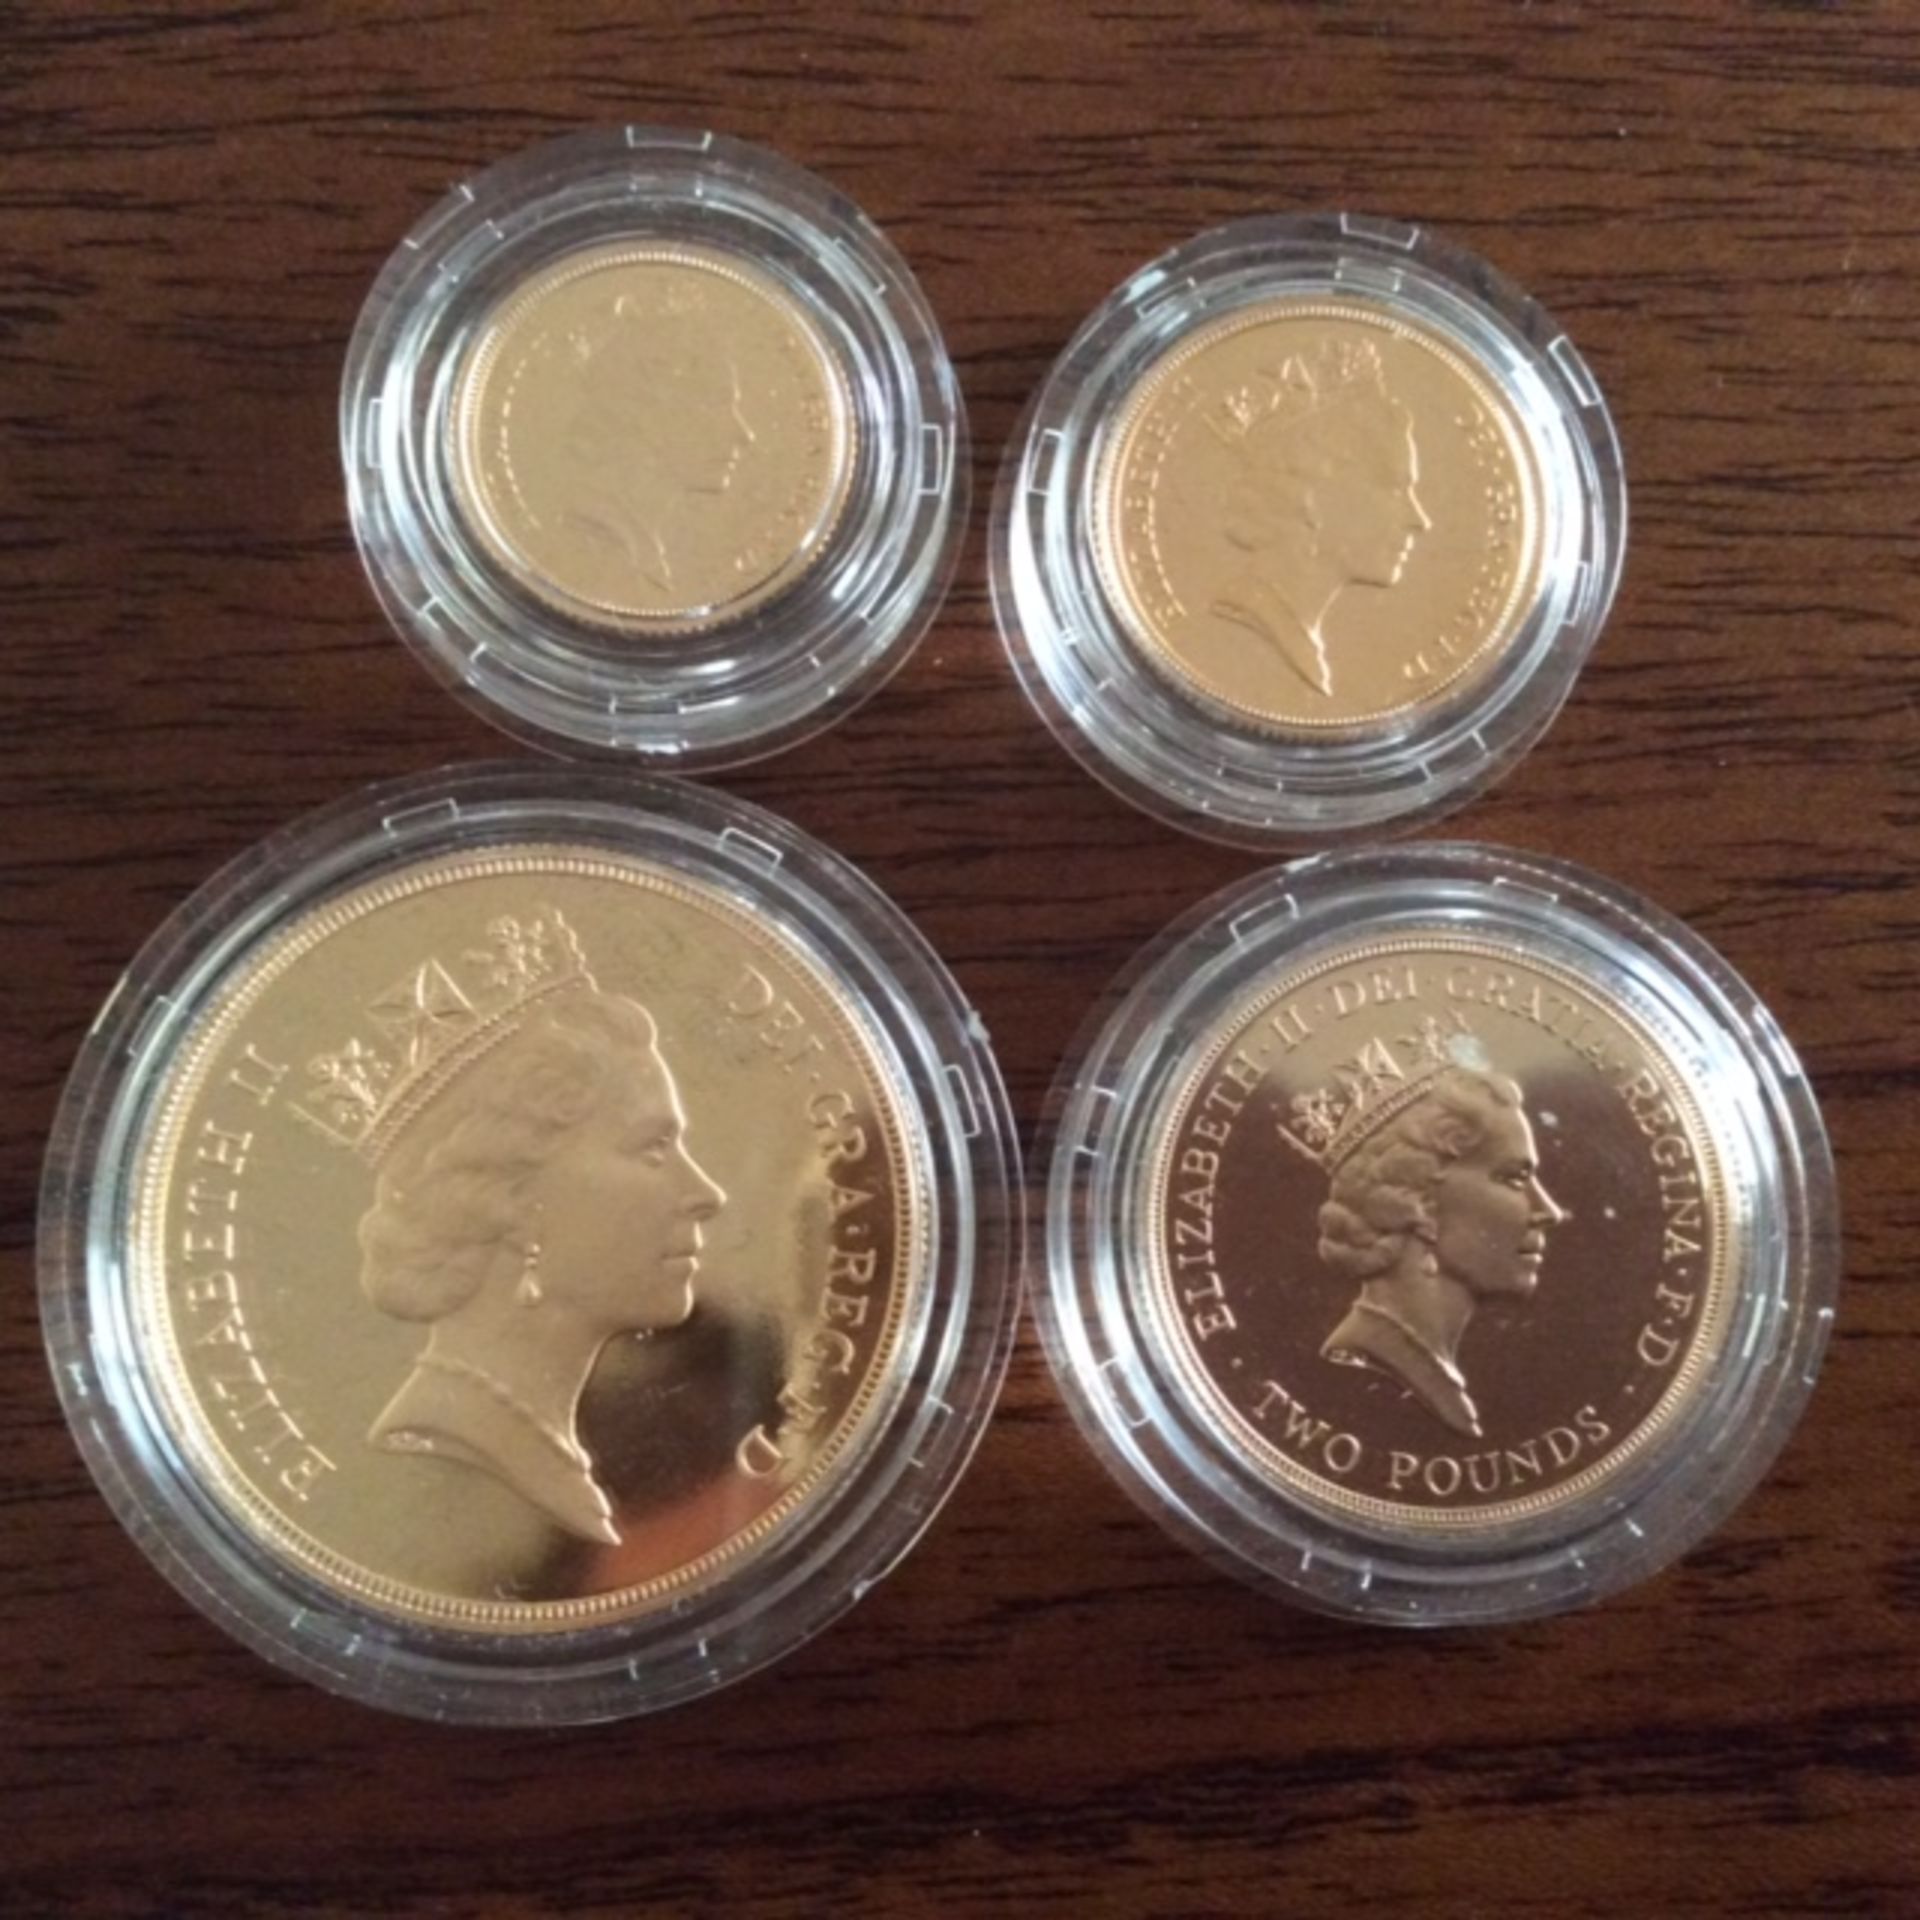 SOVEREIGN 1994 GOLD 4 COIN PROOF SET - CELEBRATING BANK OF ENGLAND TERCENTENARY - Image 3 of 5